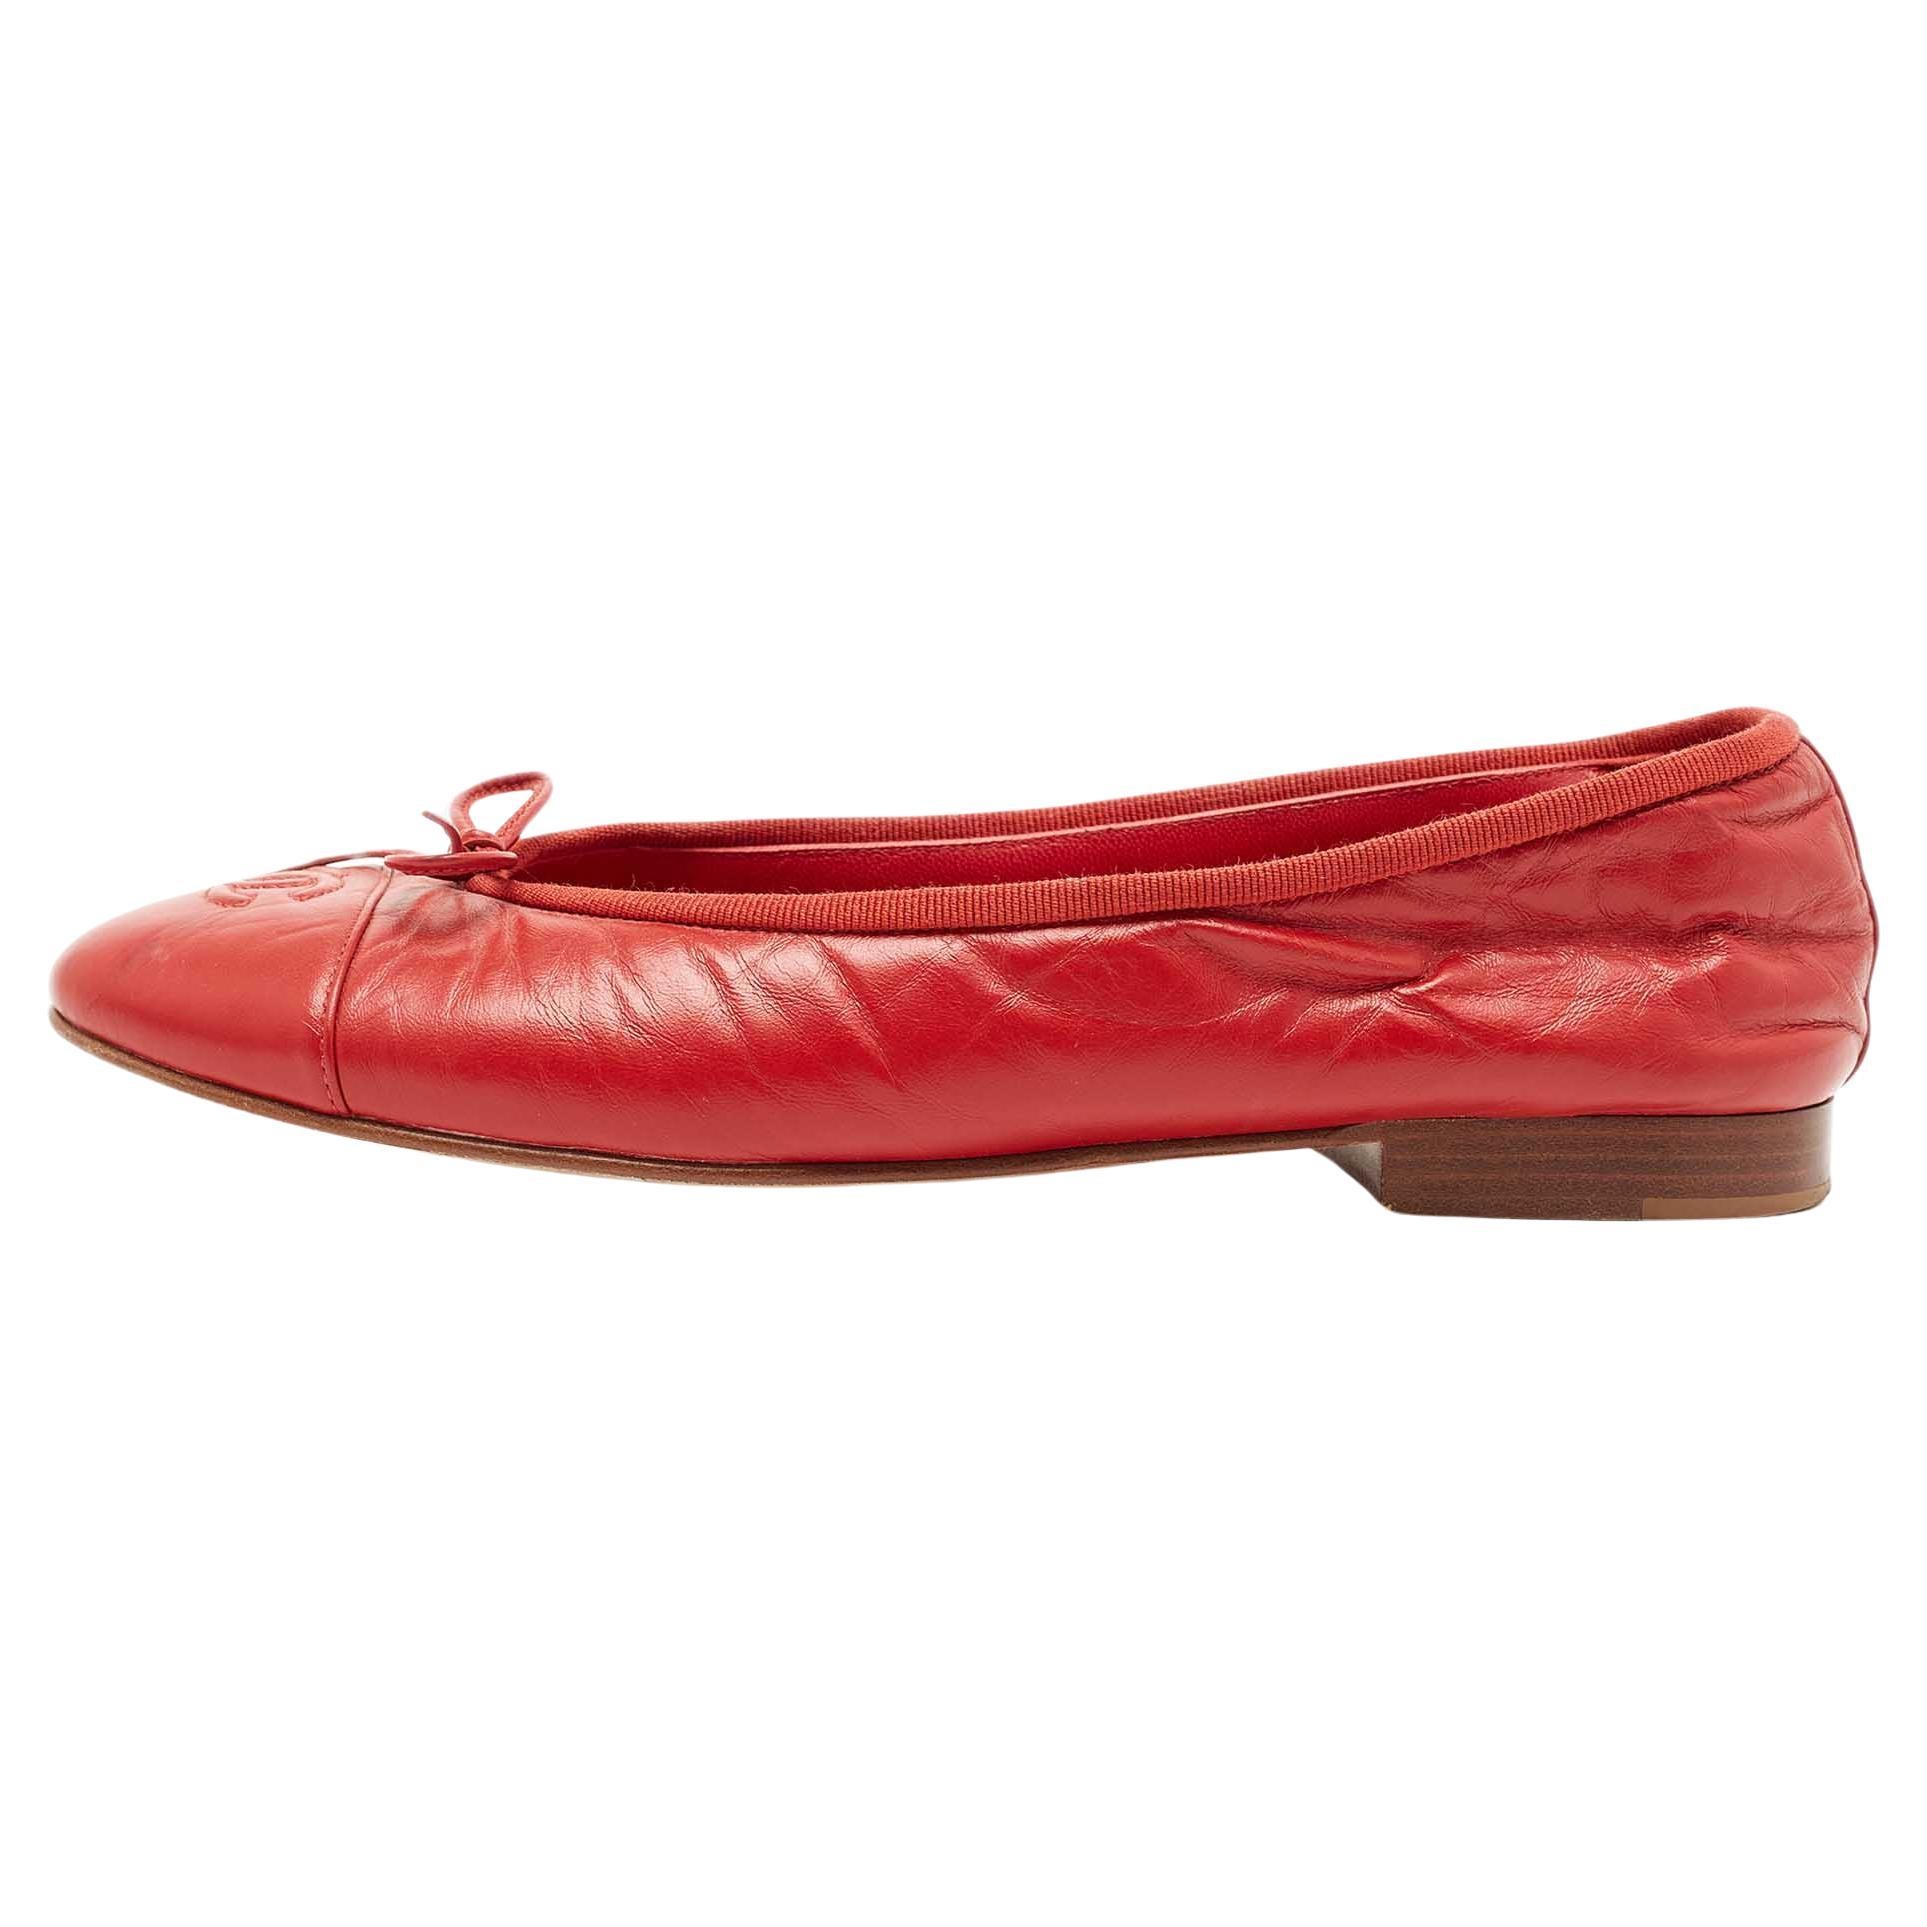 Chanel Red Leather CC Bow Ballet Flats Size 38.5